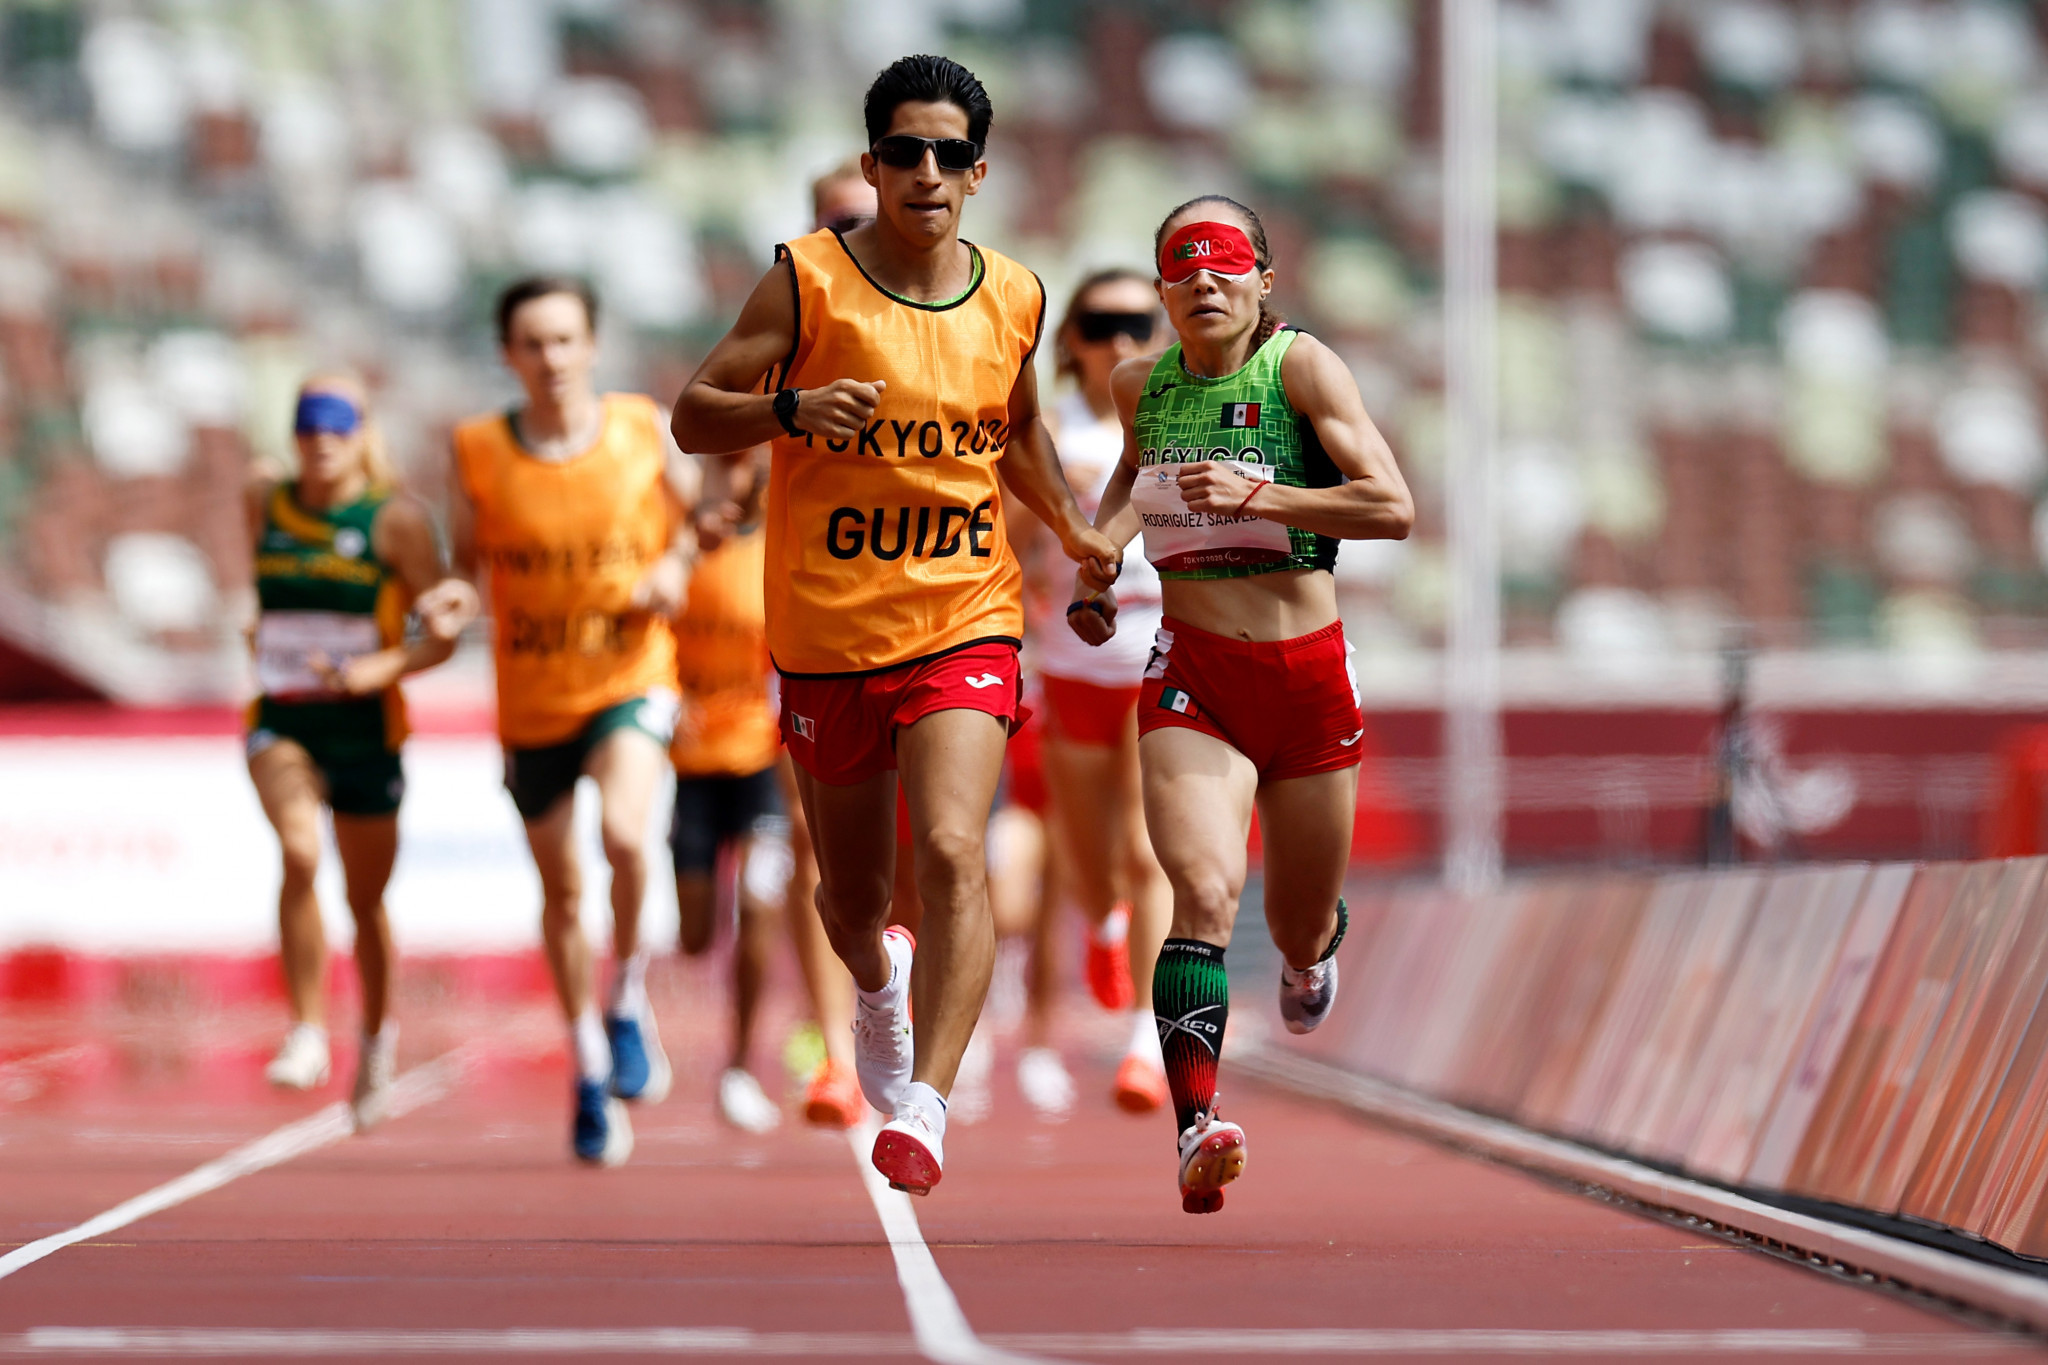 Mexico poised to hold World Para Athletics Grand Prix for first time